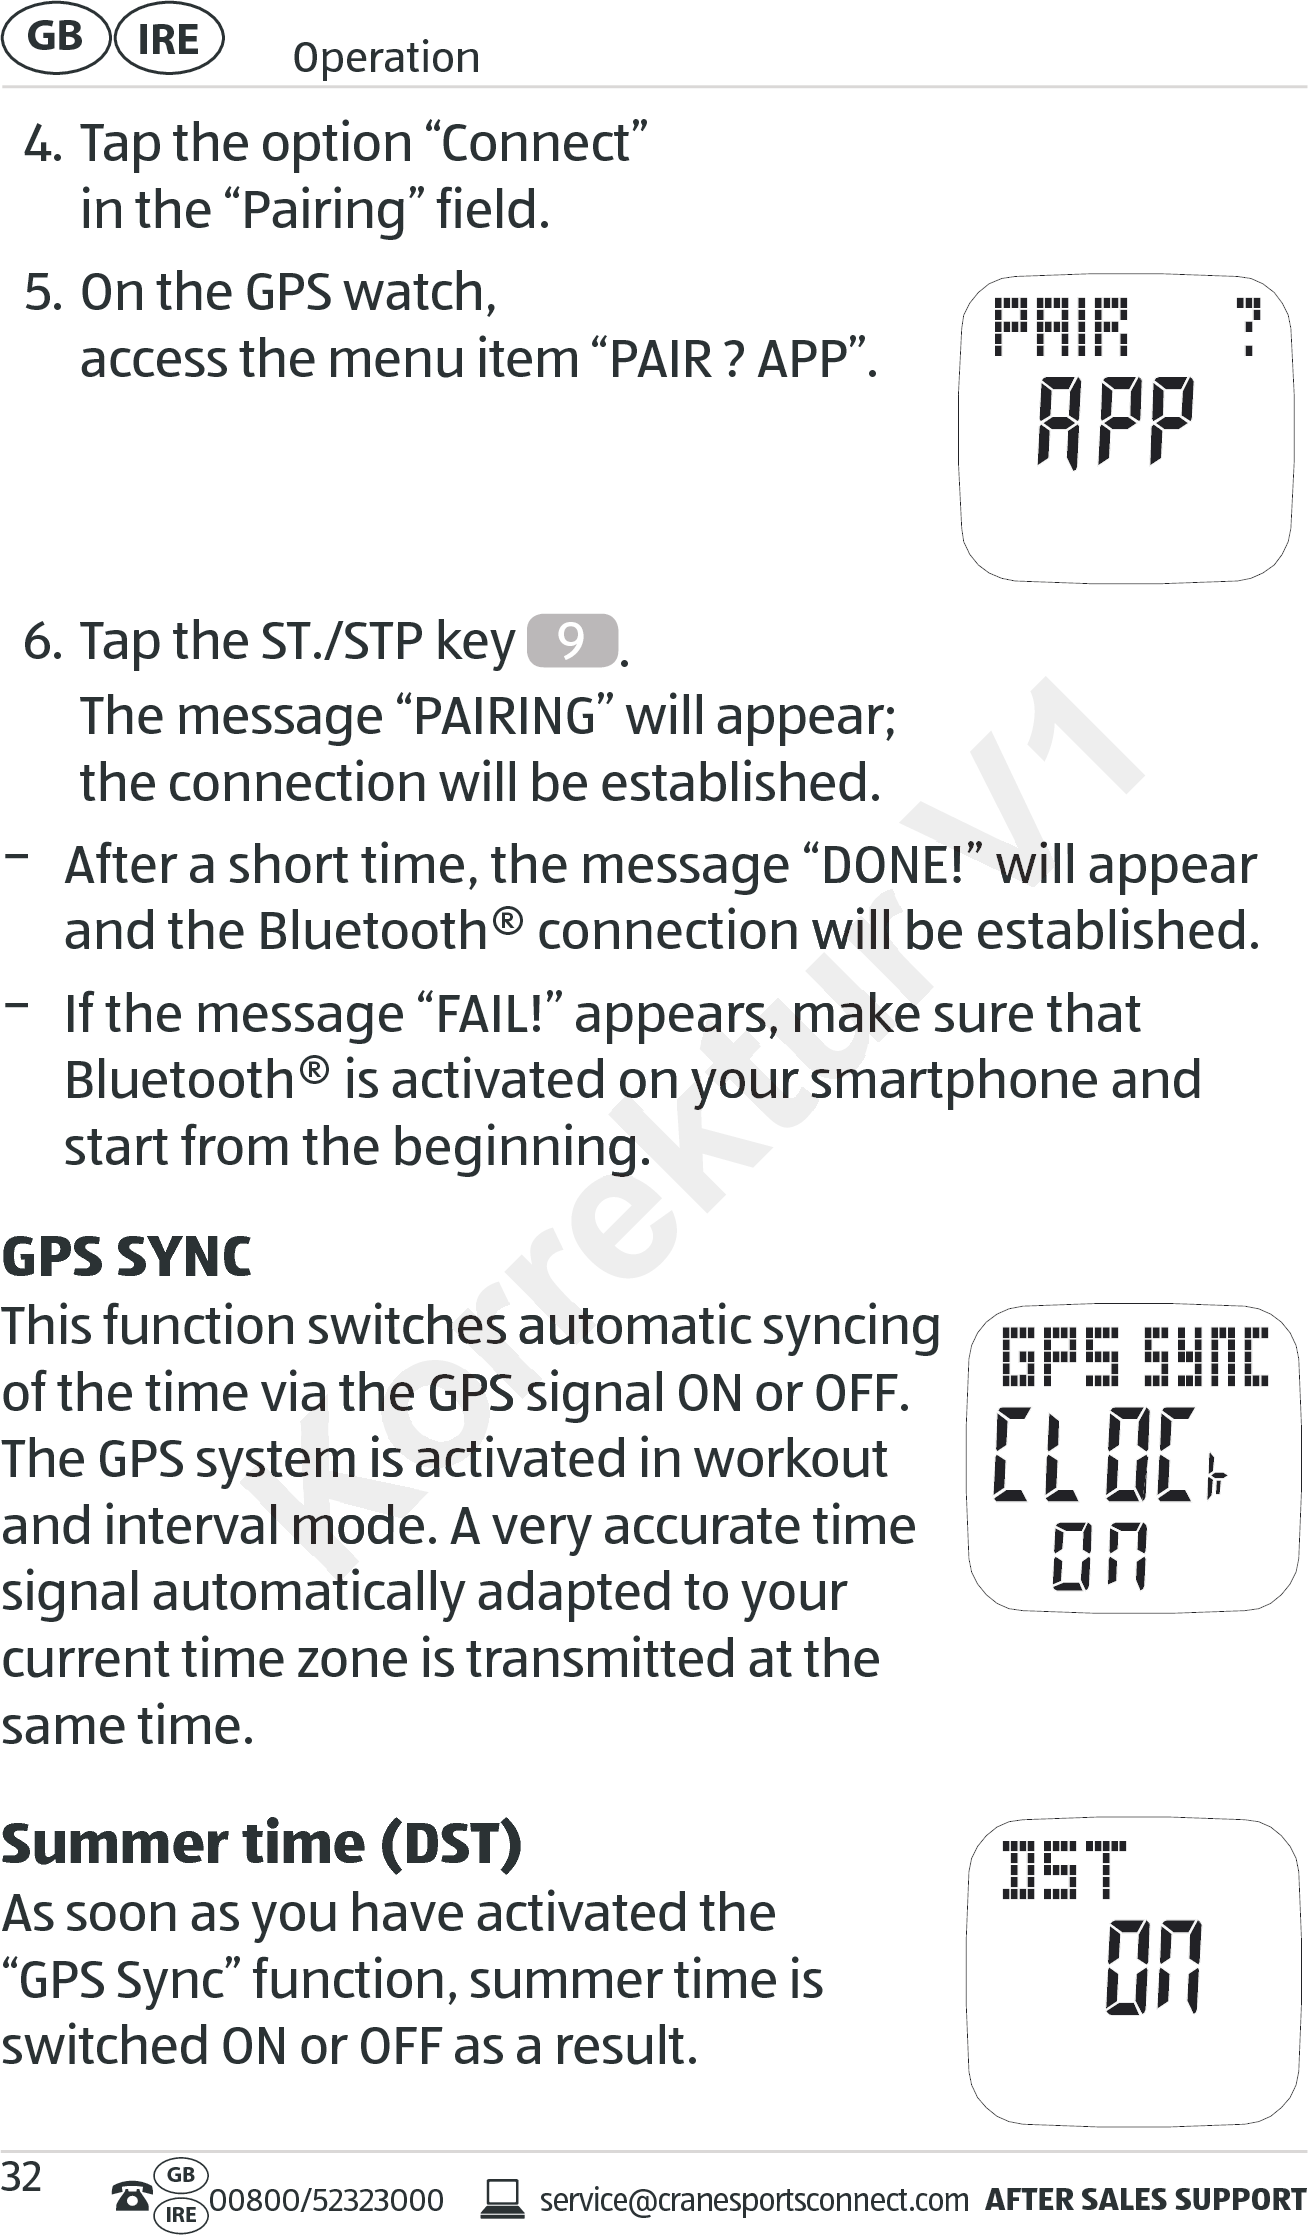 AFTER SALES SUPPORTservice@cranesportsconnect.comGBIRE 00800/52323000IRE OperationGB 324. Tap the option “Connect”  in the “Pairing” field.5. On the GPS watch,  access the menu item “PAIR ? APP”.   6. Tap the ST./STP key  9.  The message “PAIRING” will appear;  the connection will be established. − After a short time, the message “DONE!” will appear and the Bluetooth® connection will be established. − If the message “FAIL!” appears, make sure that  Bluetooth® is activated on your smartphone and start from the beginning.GPS SYNCThis function switches automatic syncing  of the time via the GPS signal ON or OFF. The GPS system is activated in workout and interval mode. A very accurate time signal automatically adapted to your  current time zone is transmitted at the same time.Summer time (DST)As soon as you have activated the  “GPS Sync” function, summer time is switched ON or OFF as a result.Korrektur er a short time, the message “DONE!” will appear er a short time, the message “DONE!” will appear and the Bluetooth® connection will be established.and the Bluetooth® connection will be established.If the message “FAIL!” appears, makIf the message “FAIL!” appears, make sure that  e sure that  Bluetooth® is activated on your smartphone and Bluetooth® is activated on your smartphone and start from the beginning.start from the beginning.This function switches automatic syncing This function switches automatic syncing of the time via the GPS signal ON or OFF. of the time via the GPS signal ON or OFF. The GPS system is activated in workout The GPS system is activated in workout and interval mode. A very accurate time and interval mode. A very accurate time signal automatically adapted to your signal automatically adapted to your V1er a short time, the message “DONE!” will appear er a short time, the message “DONE!” will appear and the Bluetooth® connection will be established.